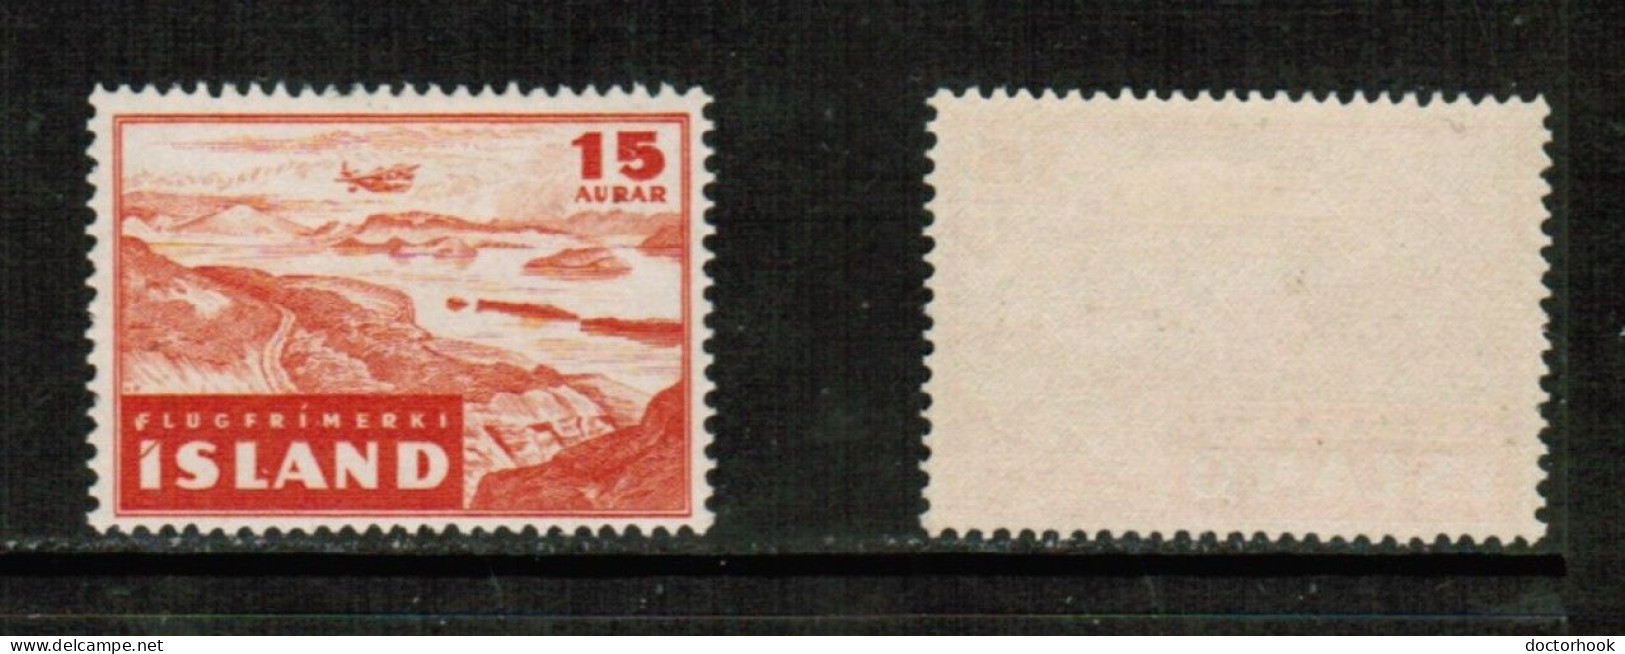 ICELAND   Scott # C 21* MINT LH (CONDITION AS PER SCAN) (Stamp Scan # 950-18) - Aéreo